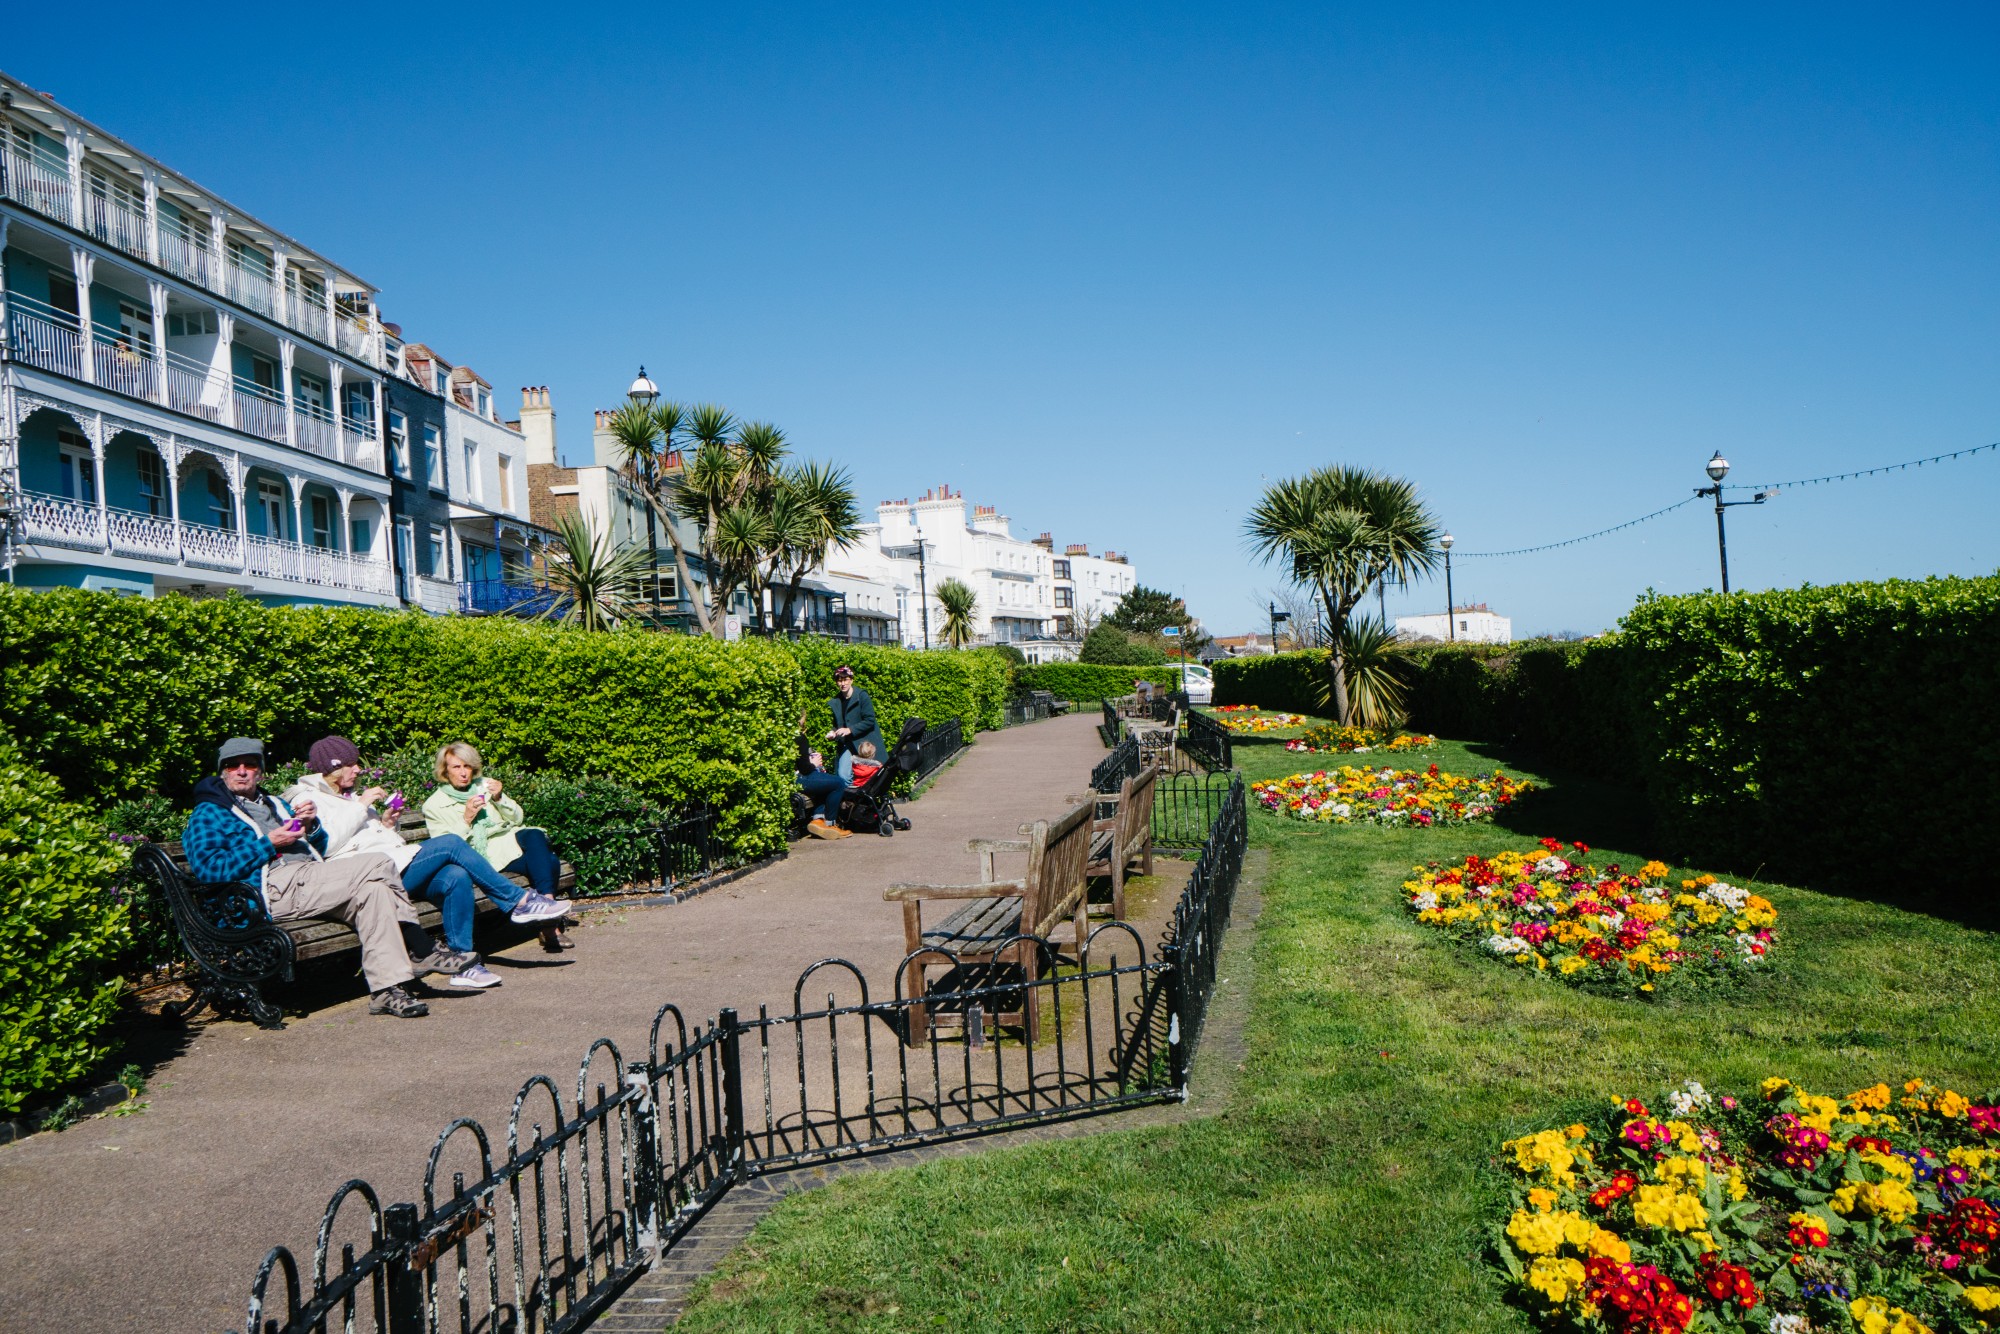 Explore and enjoy the parks and greenspaces of Margate, Broadstairs and